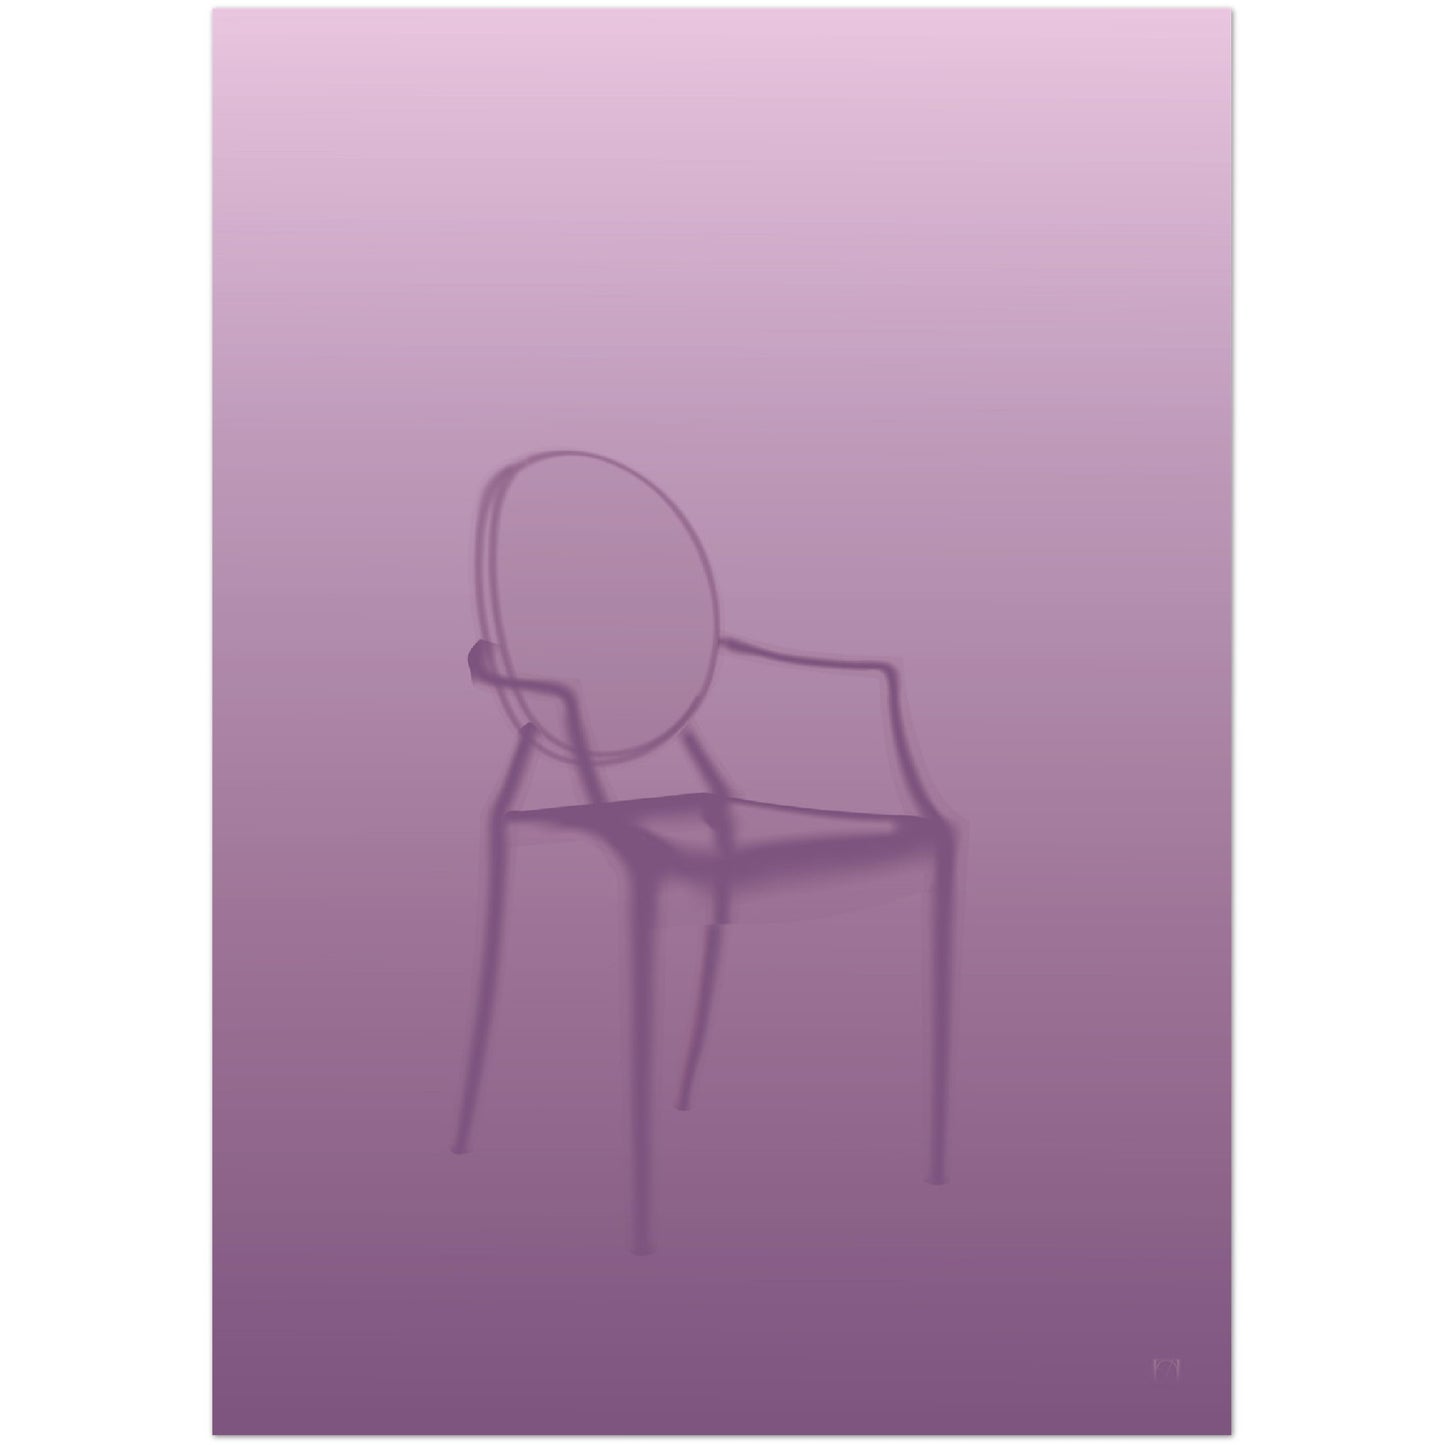 Ghost Chair - Philippe Starck